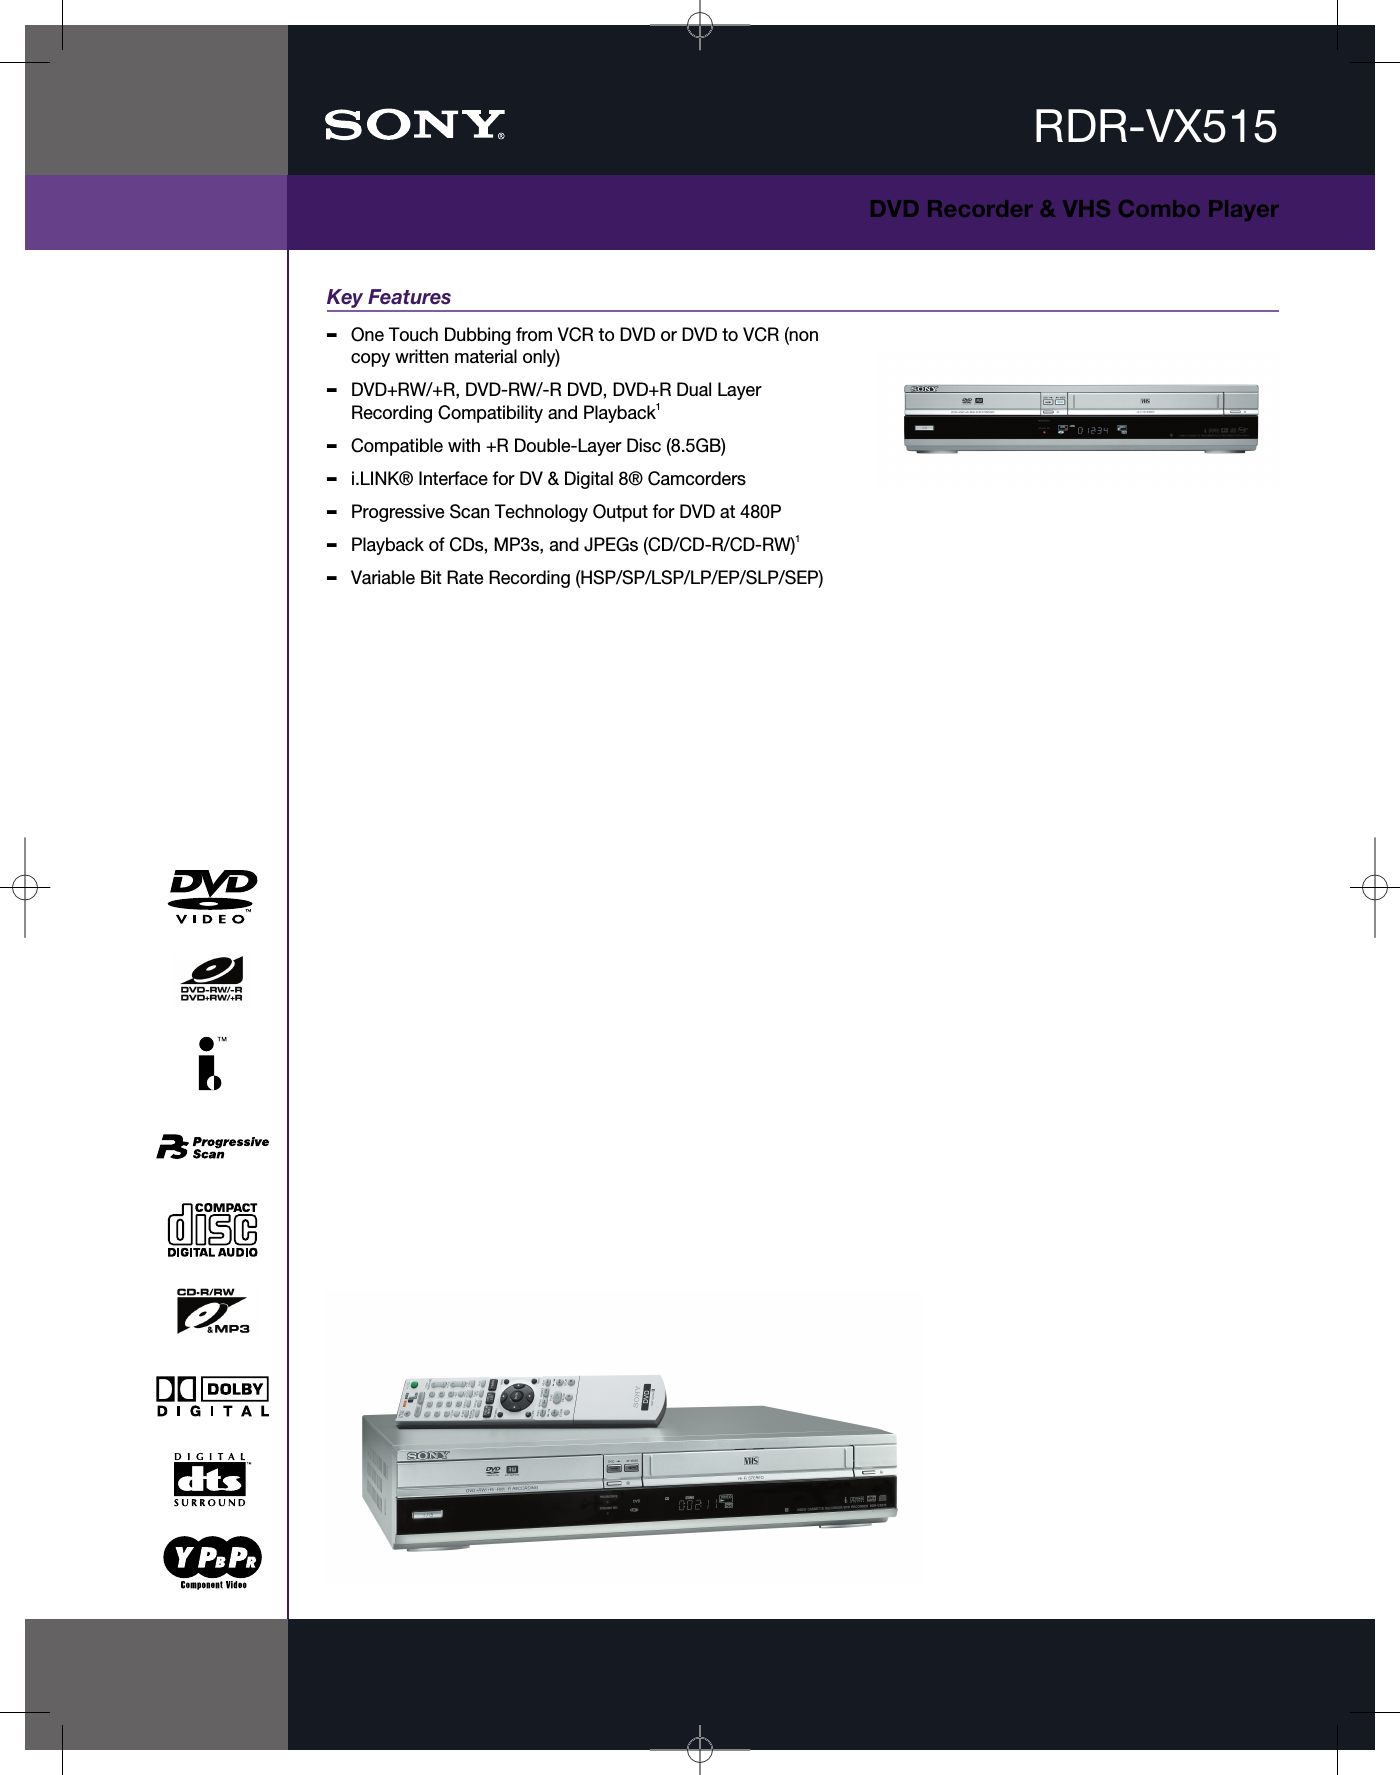 Page 1 of 2 - Sony RDR-VX515 User Manual Marketing Specifications RDRVX515 Mksp